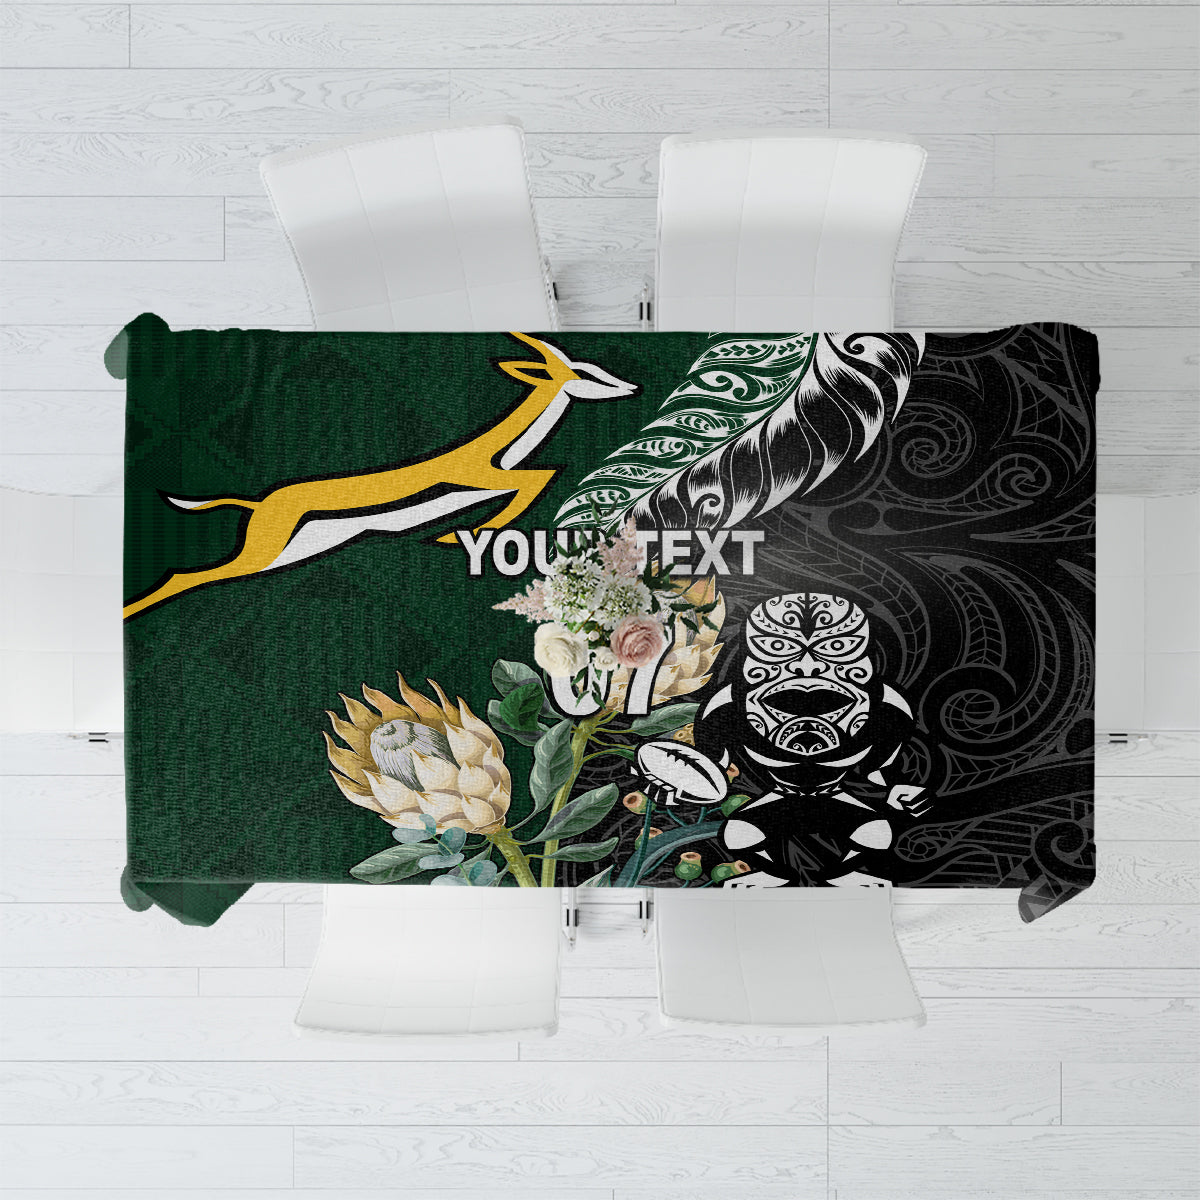 Custom South Africa Mix New Zealand Rugby 2023 Tablecloth World Cup Greatest Rivalry LT7 Black Green - Polynesian Pride